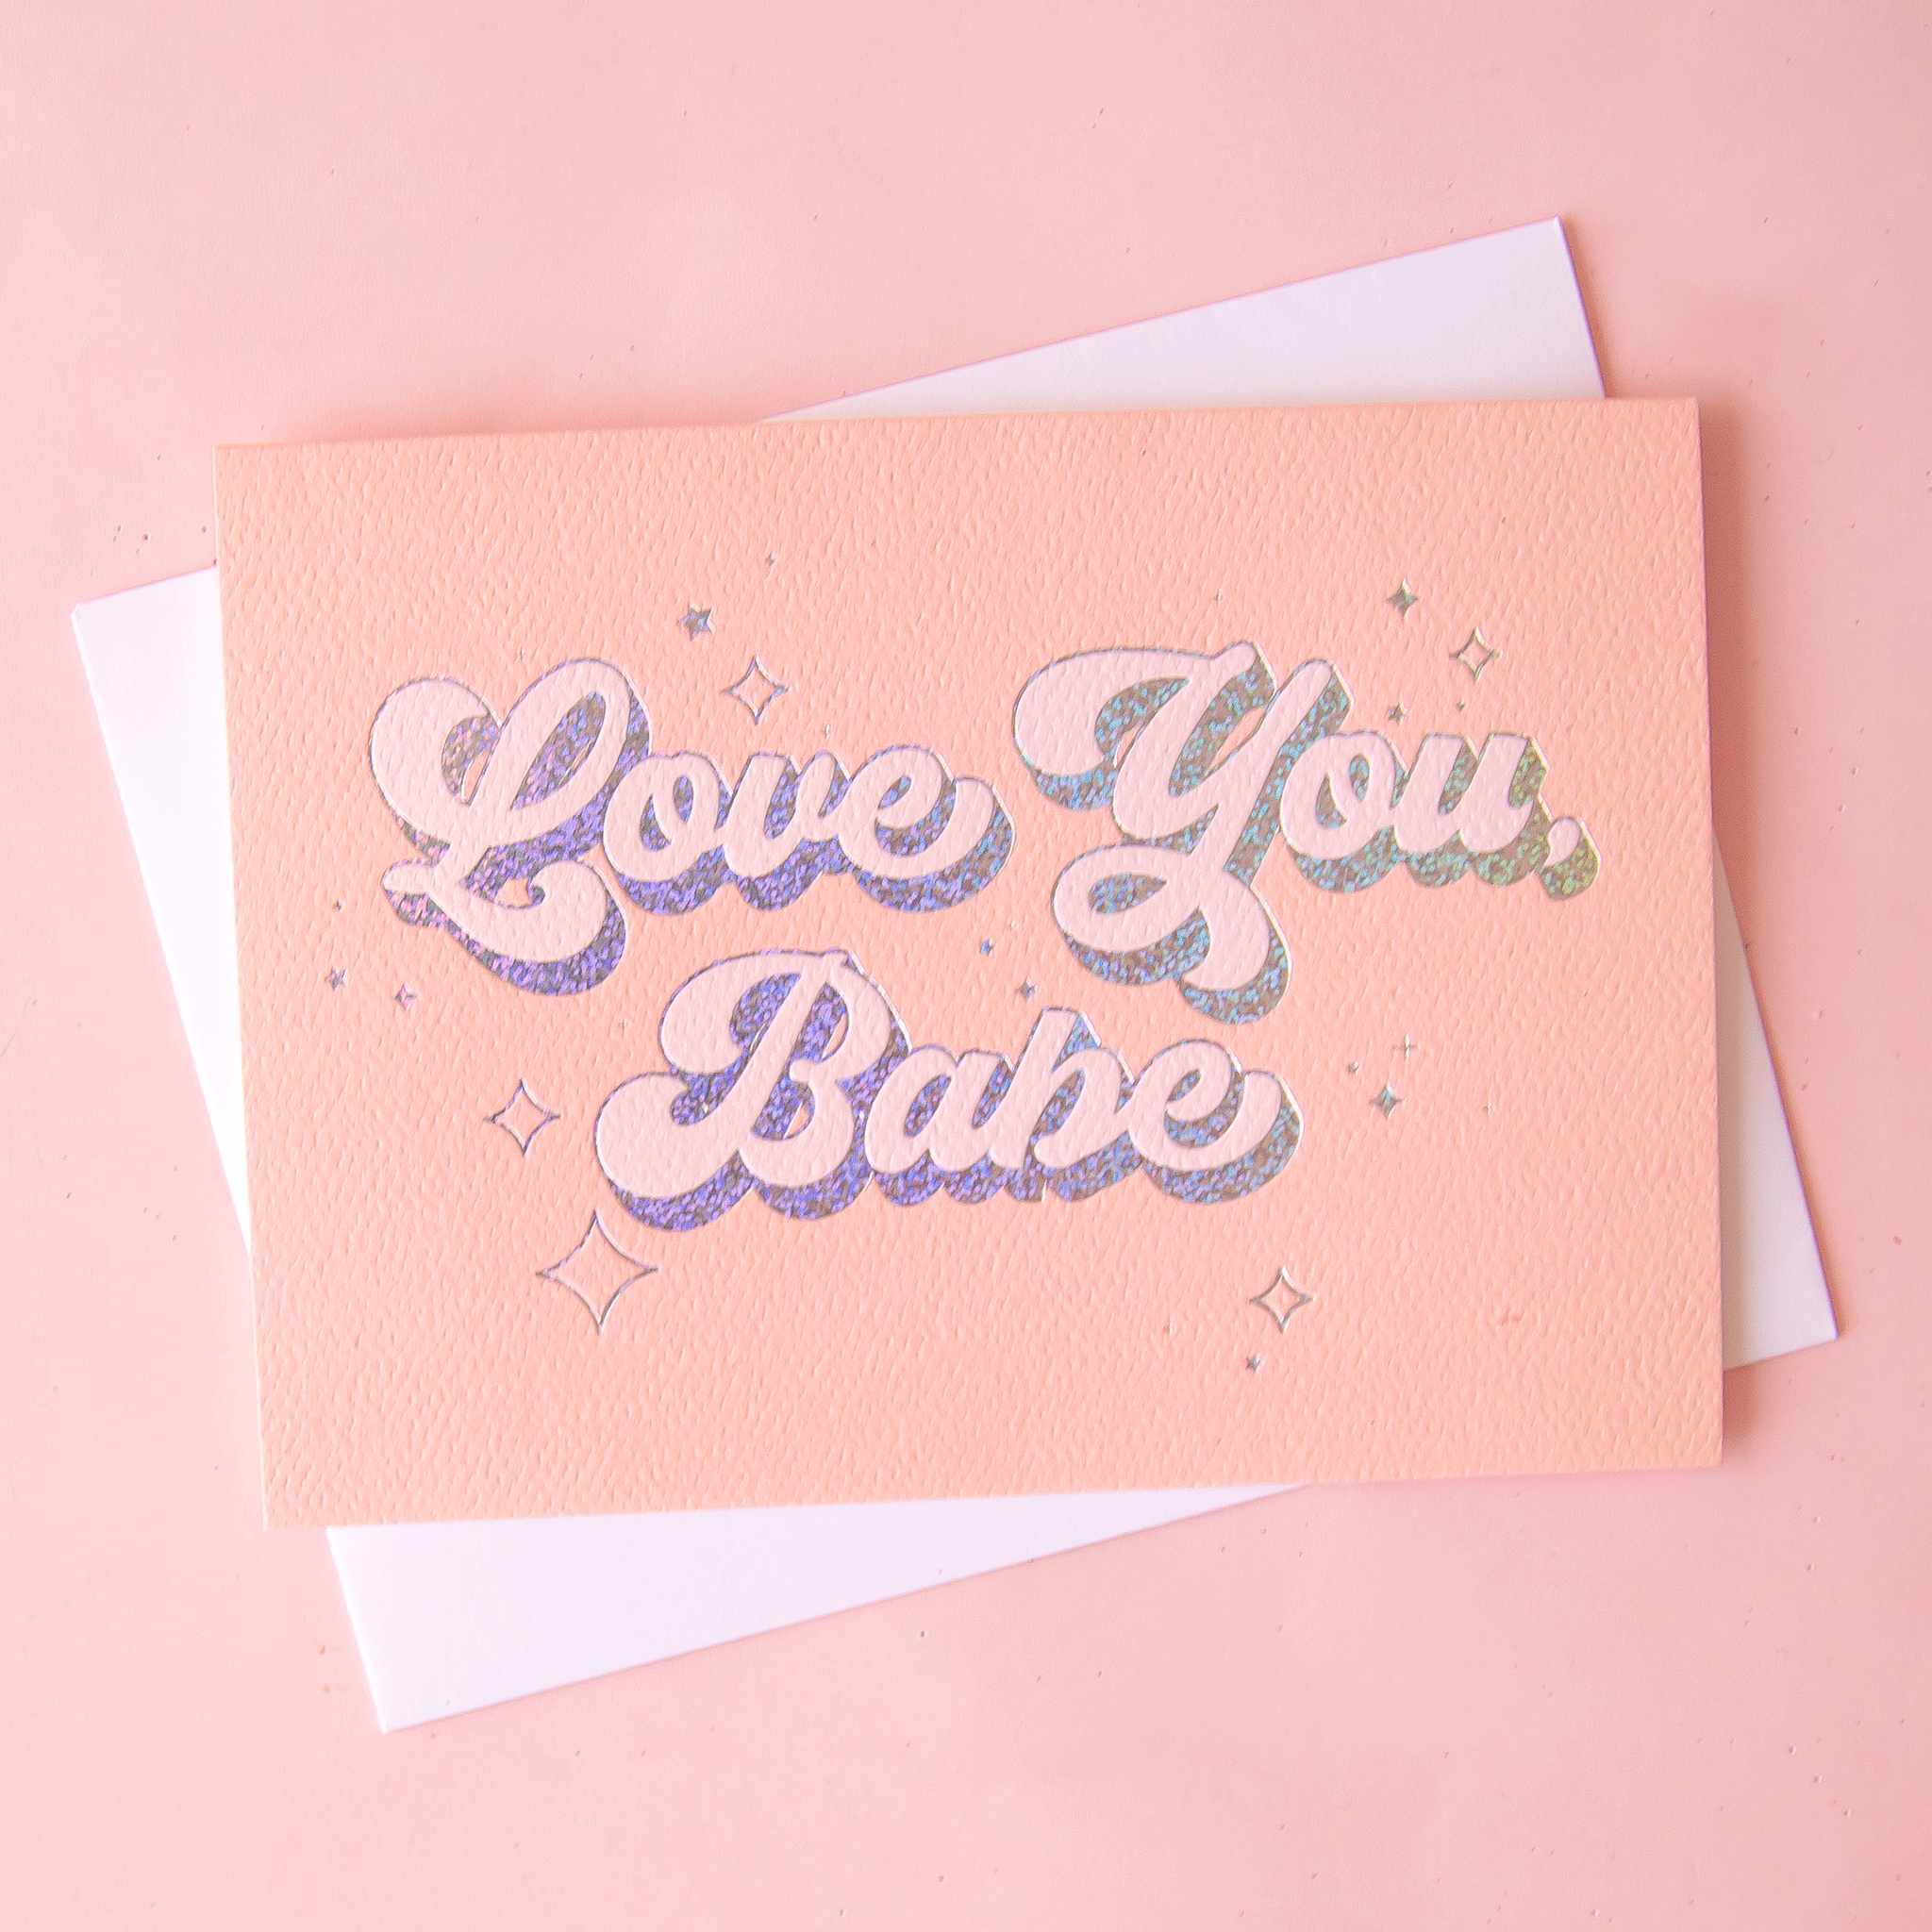 On a pink background is a peachy greeting card with "Love You Babe" text in the center that is outlined with holographic foil detailing. Also included is a white envelope.